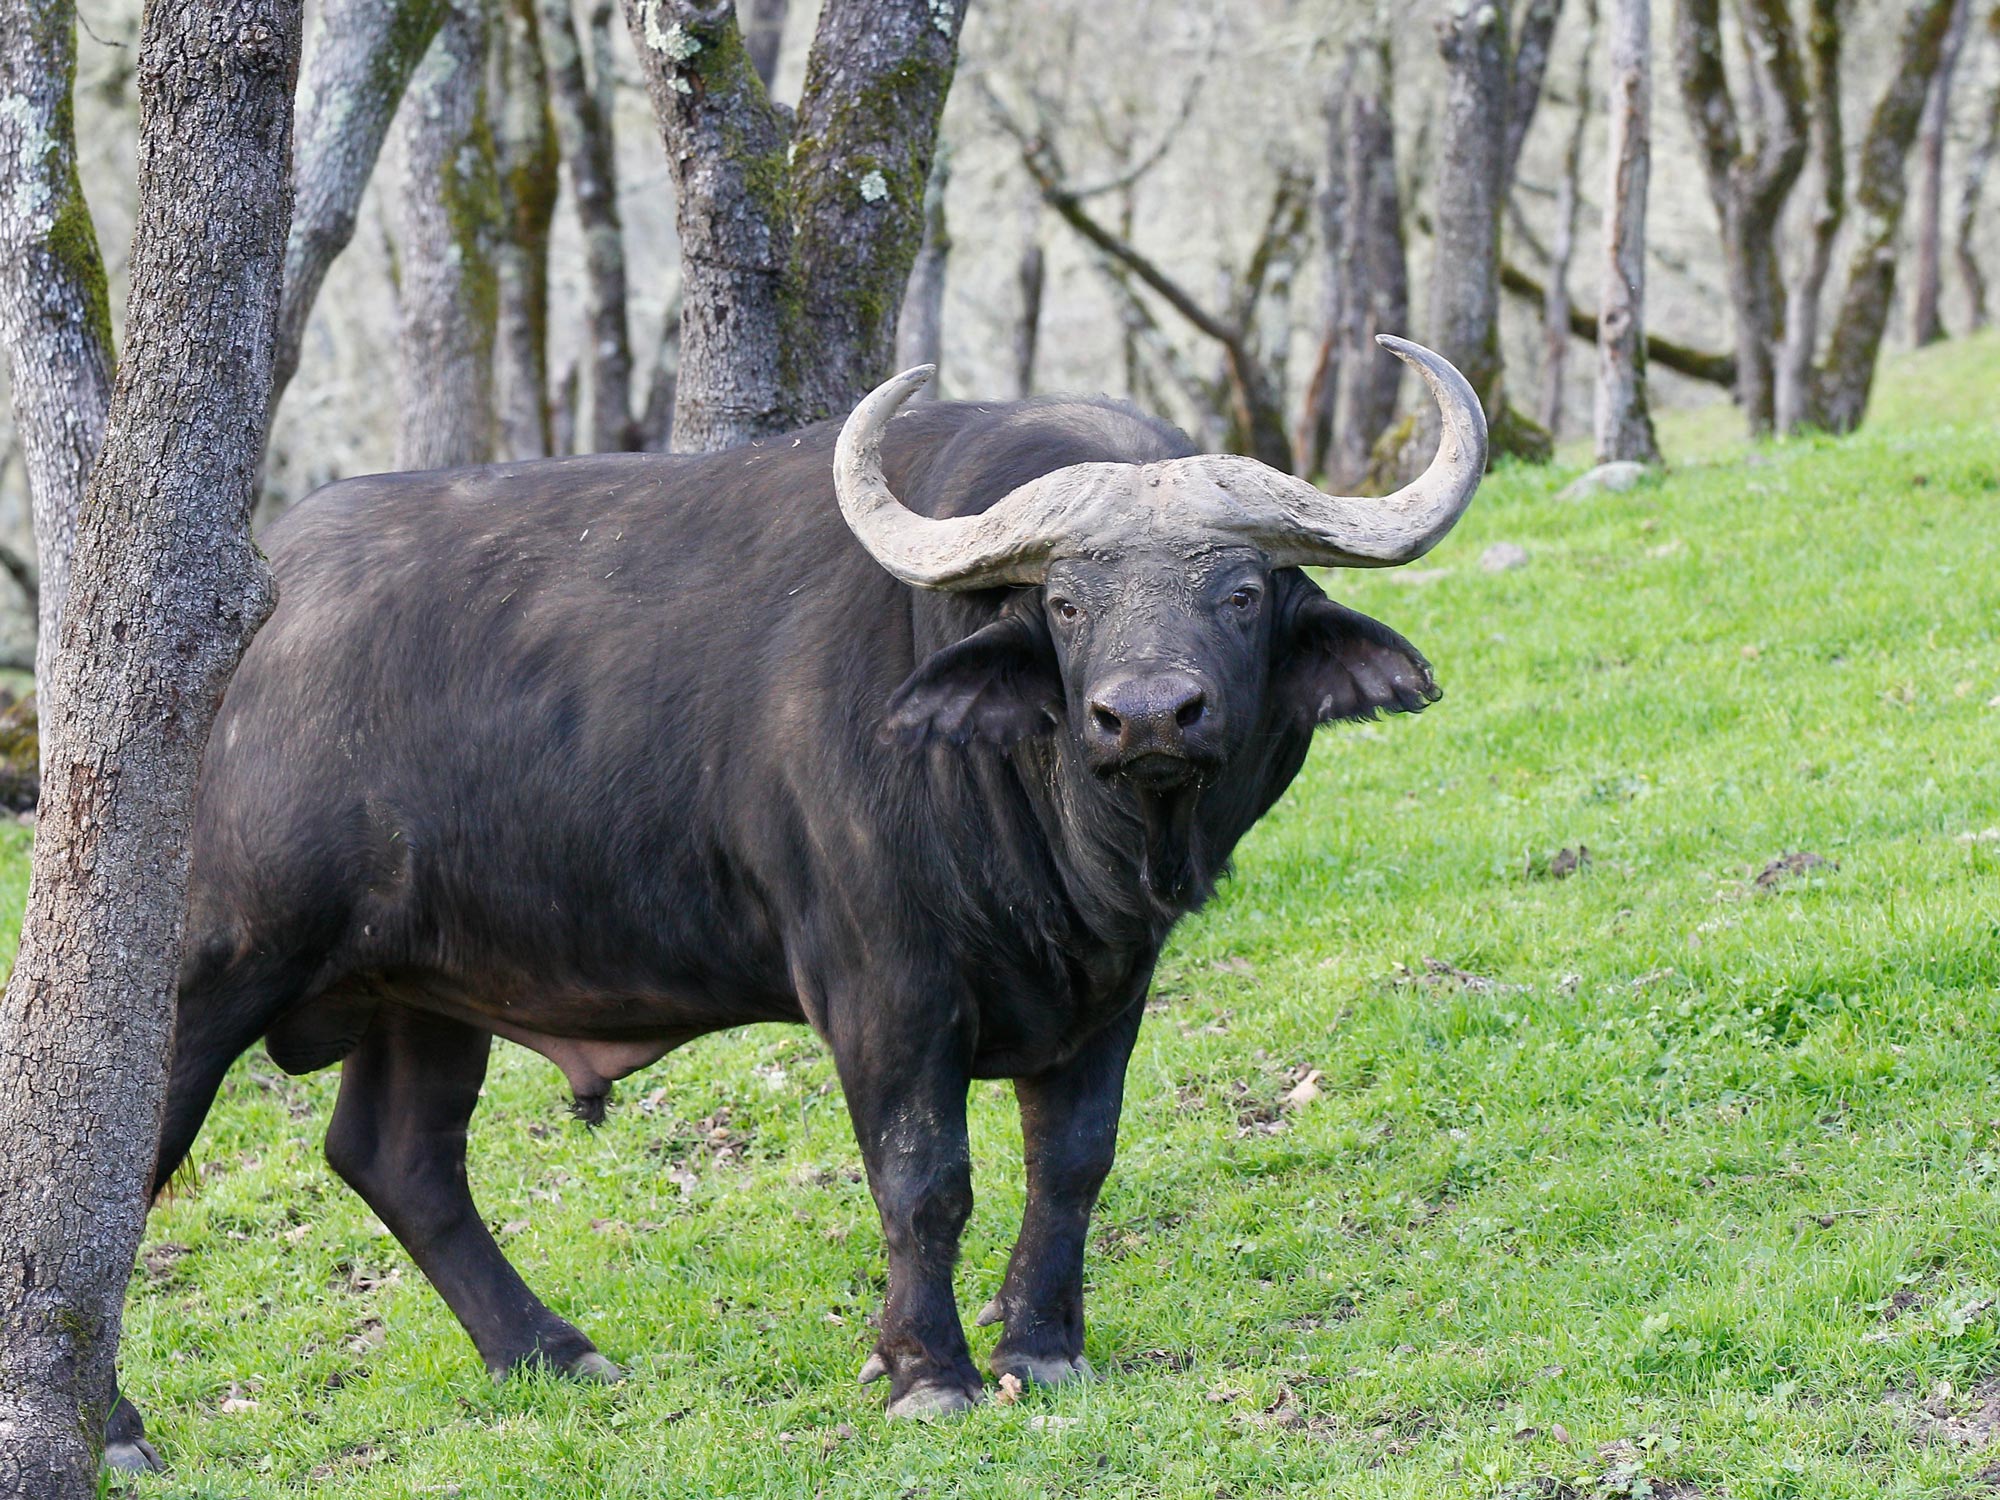 African buffalo, facts and photos